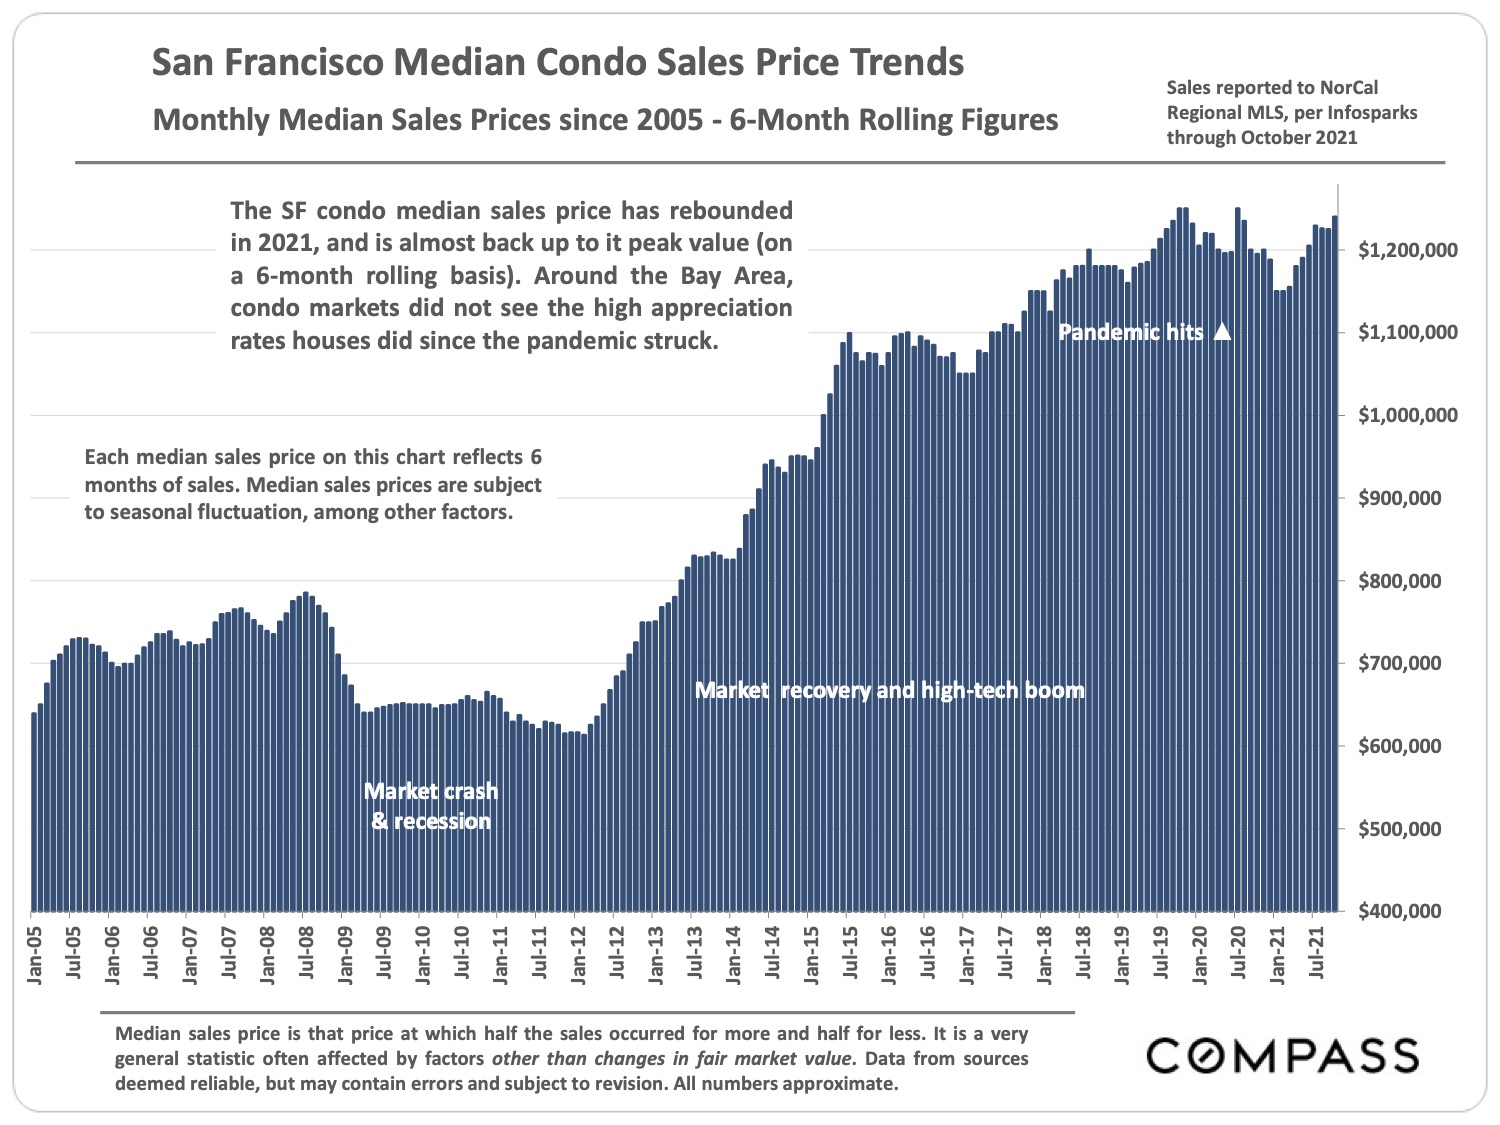 San Francisco Median Condo Sales Monthly Median Sales Prices since 2005 6 month Rolling Figures page 10 of San Francisco Real Estate Market Report November 2021